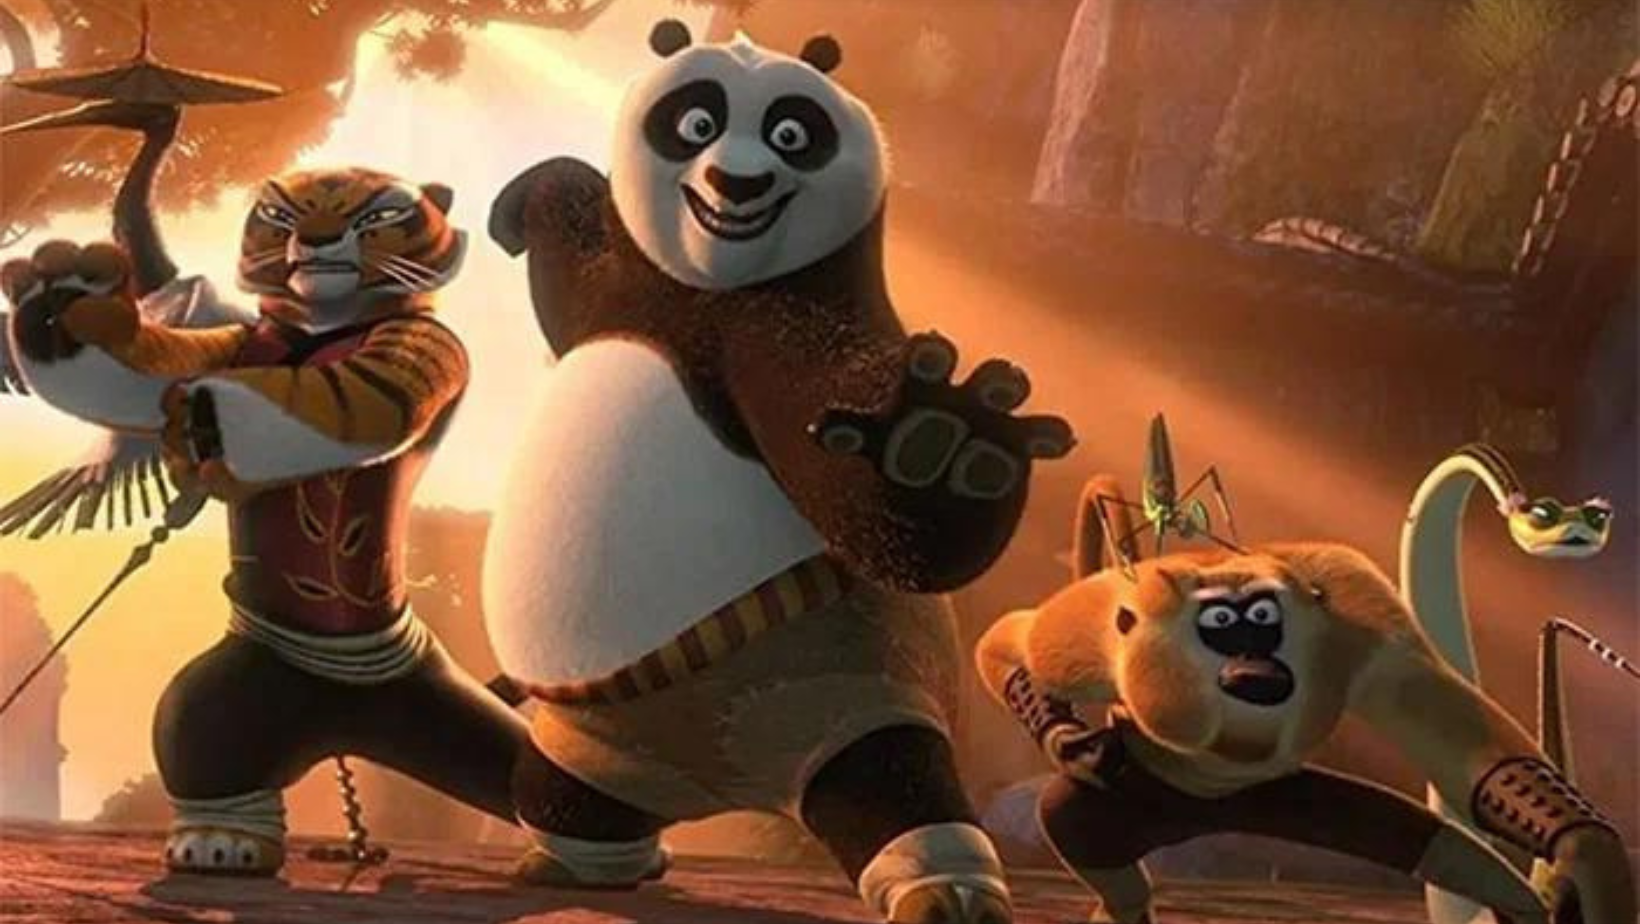 'Kung Fu Panda 4' maintains its top spot in the box office rankings.